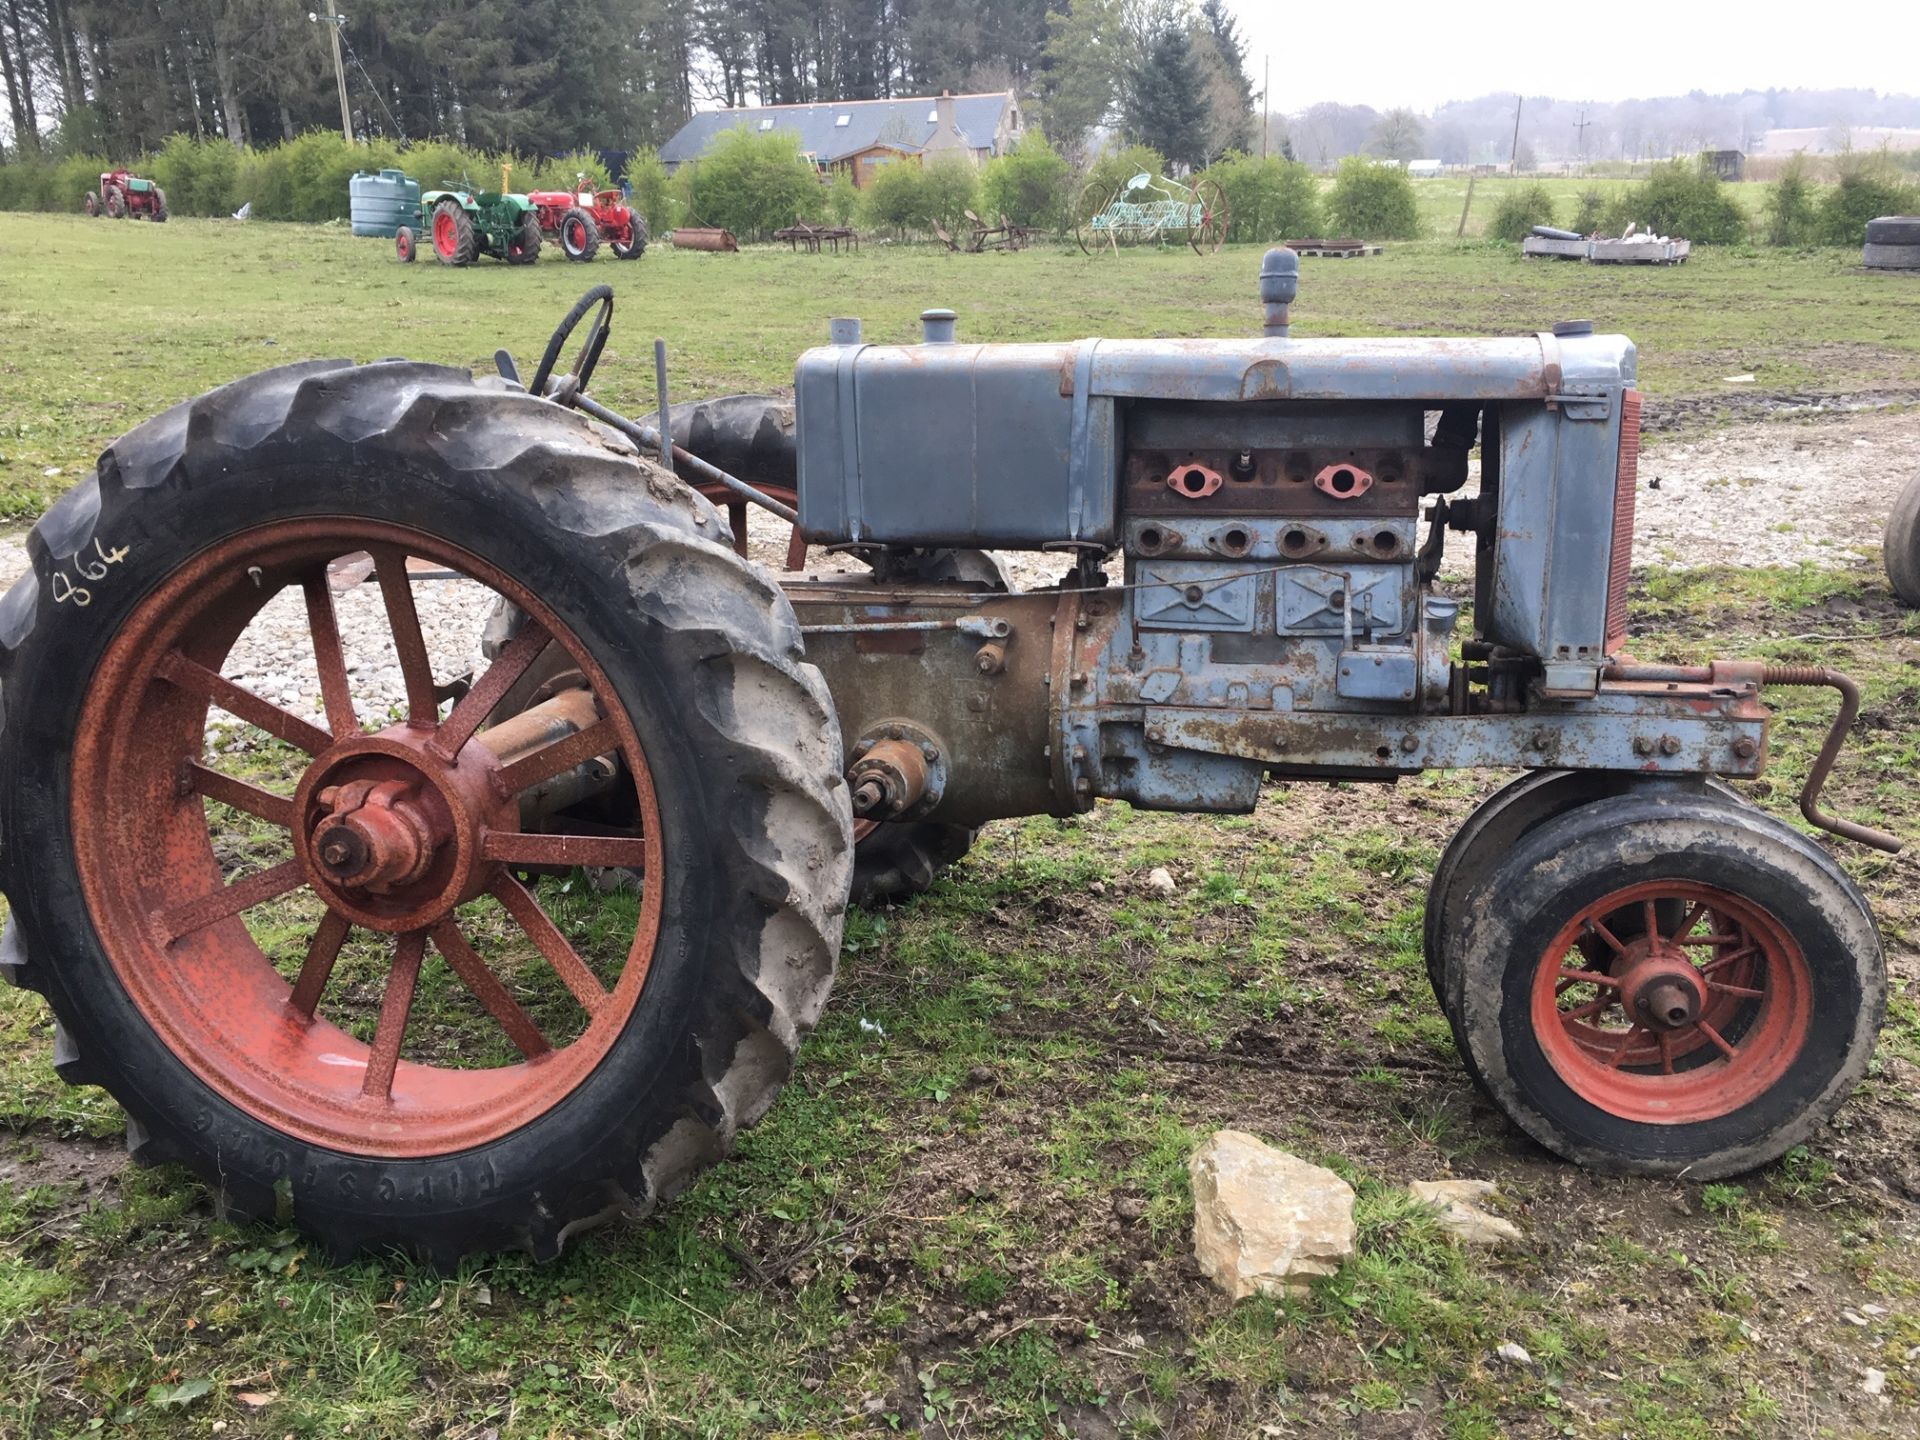 Twin City Tractor - incomplete restoration project.